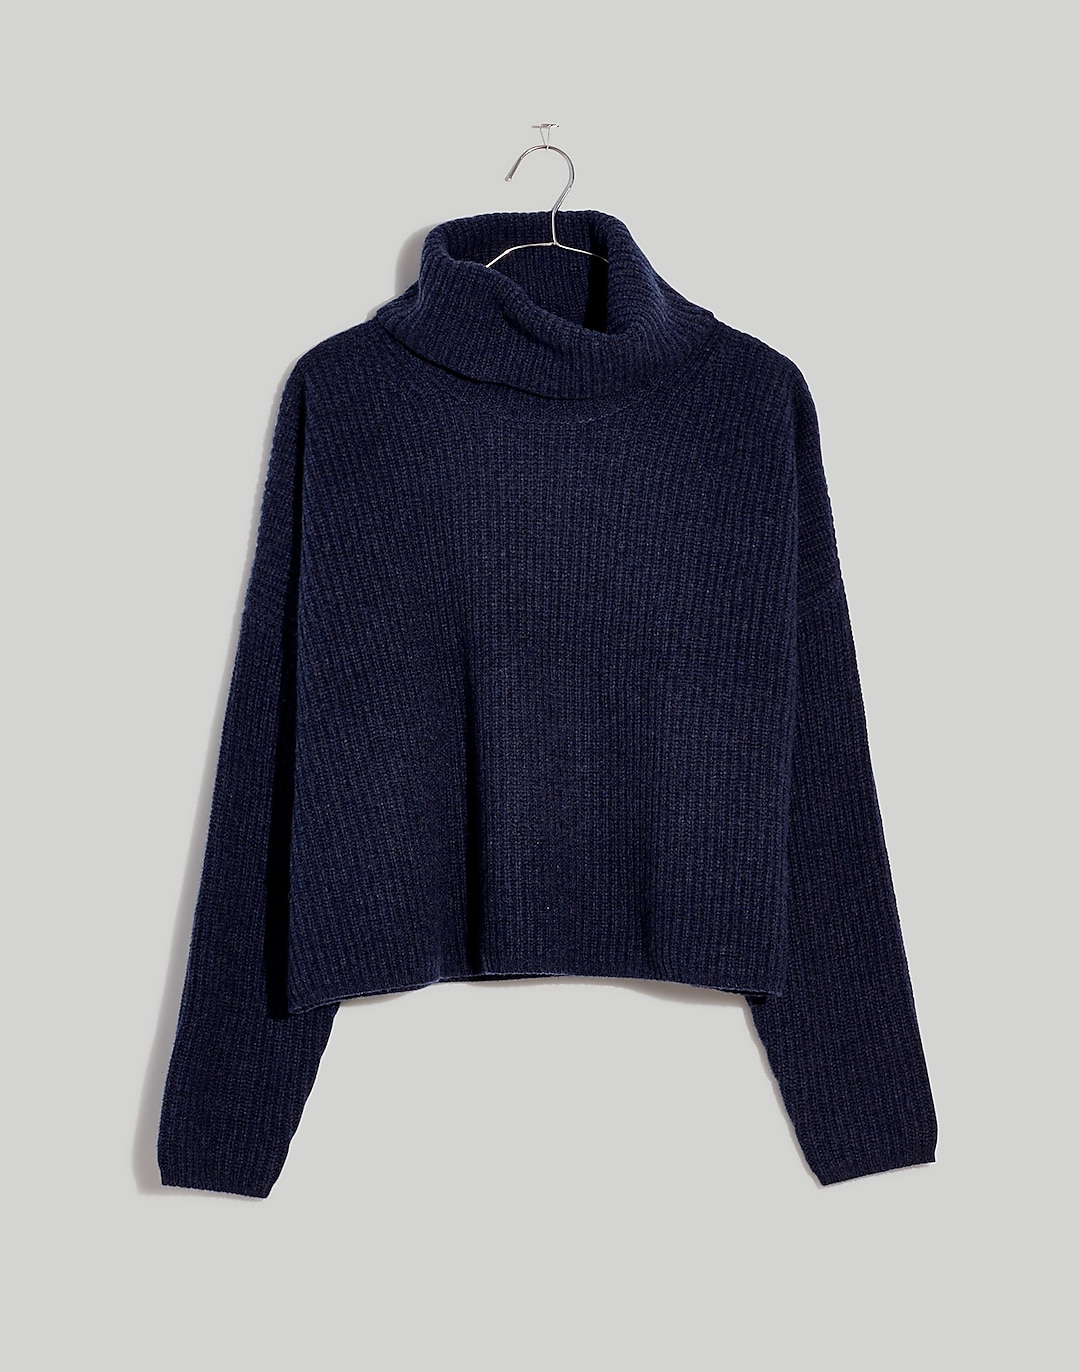 Plus (Re)sourced Cashmere Turtleneck Sweater | Madewell